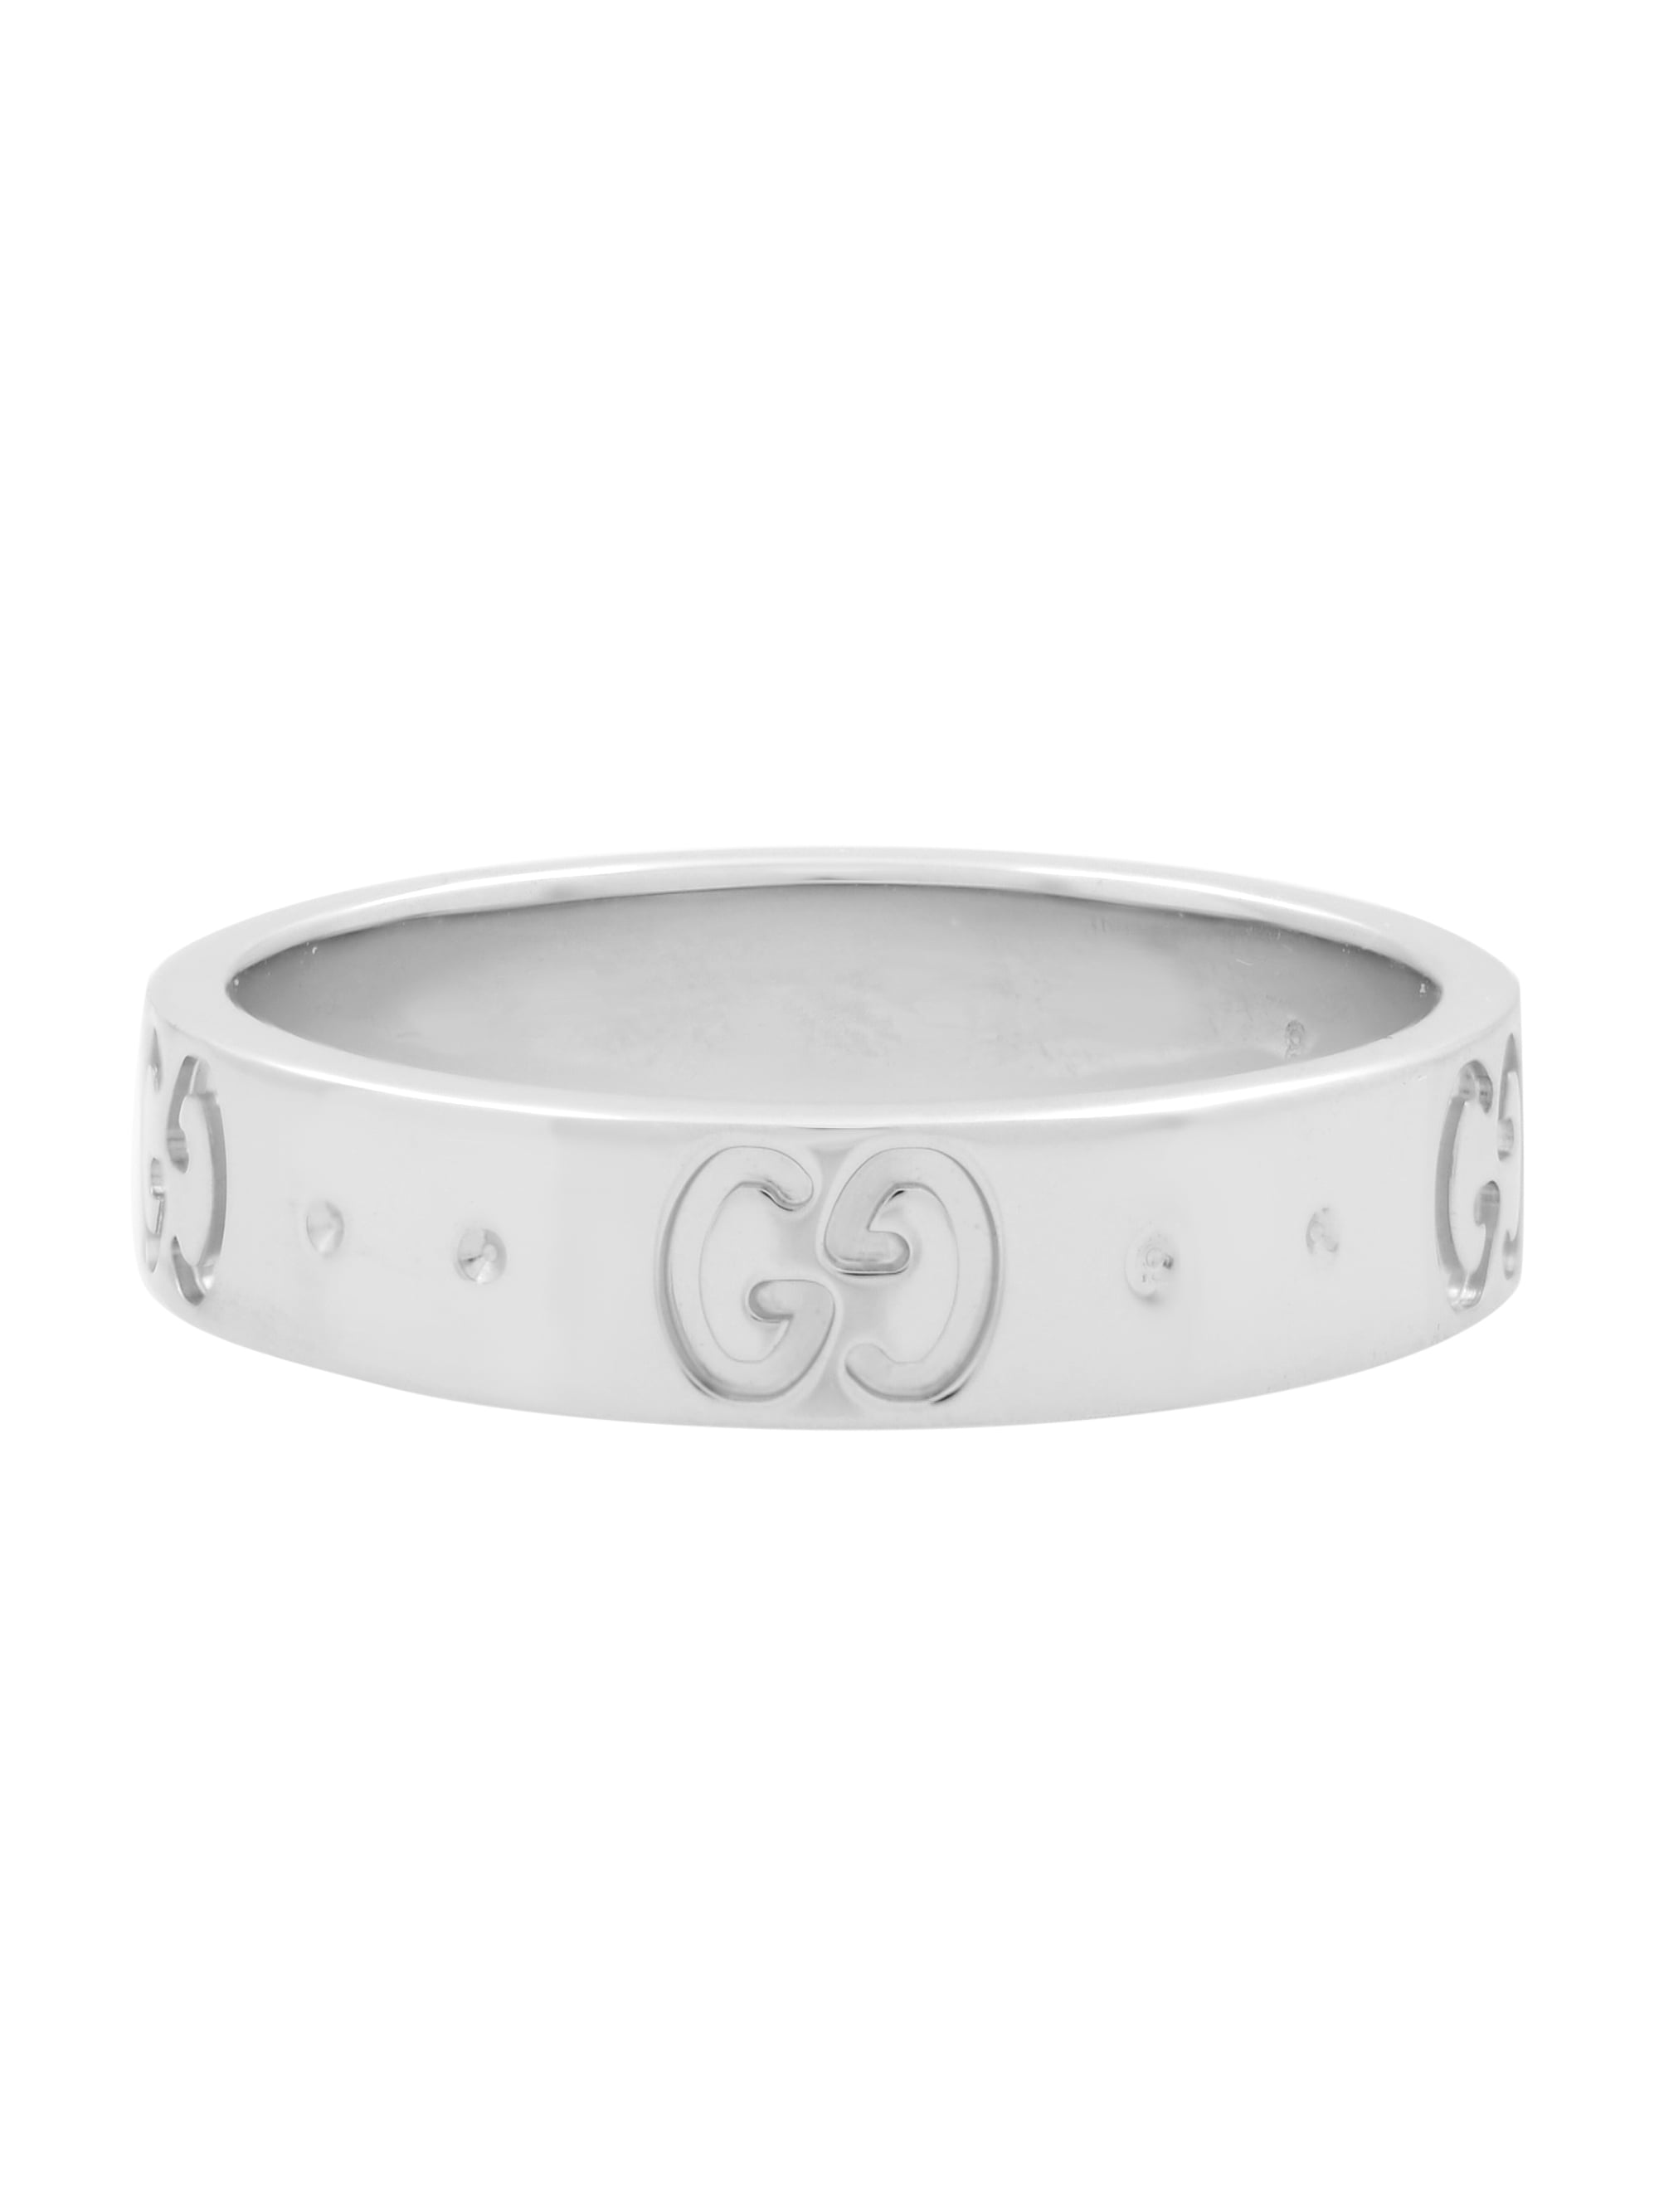 regn tildele rille Gucci 18K White Gold Icon GG Thin Band Ring Size 4.5 Pre-Owned - Walmart.com